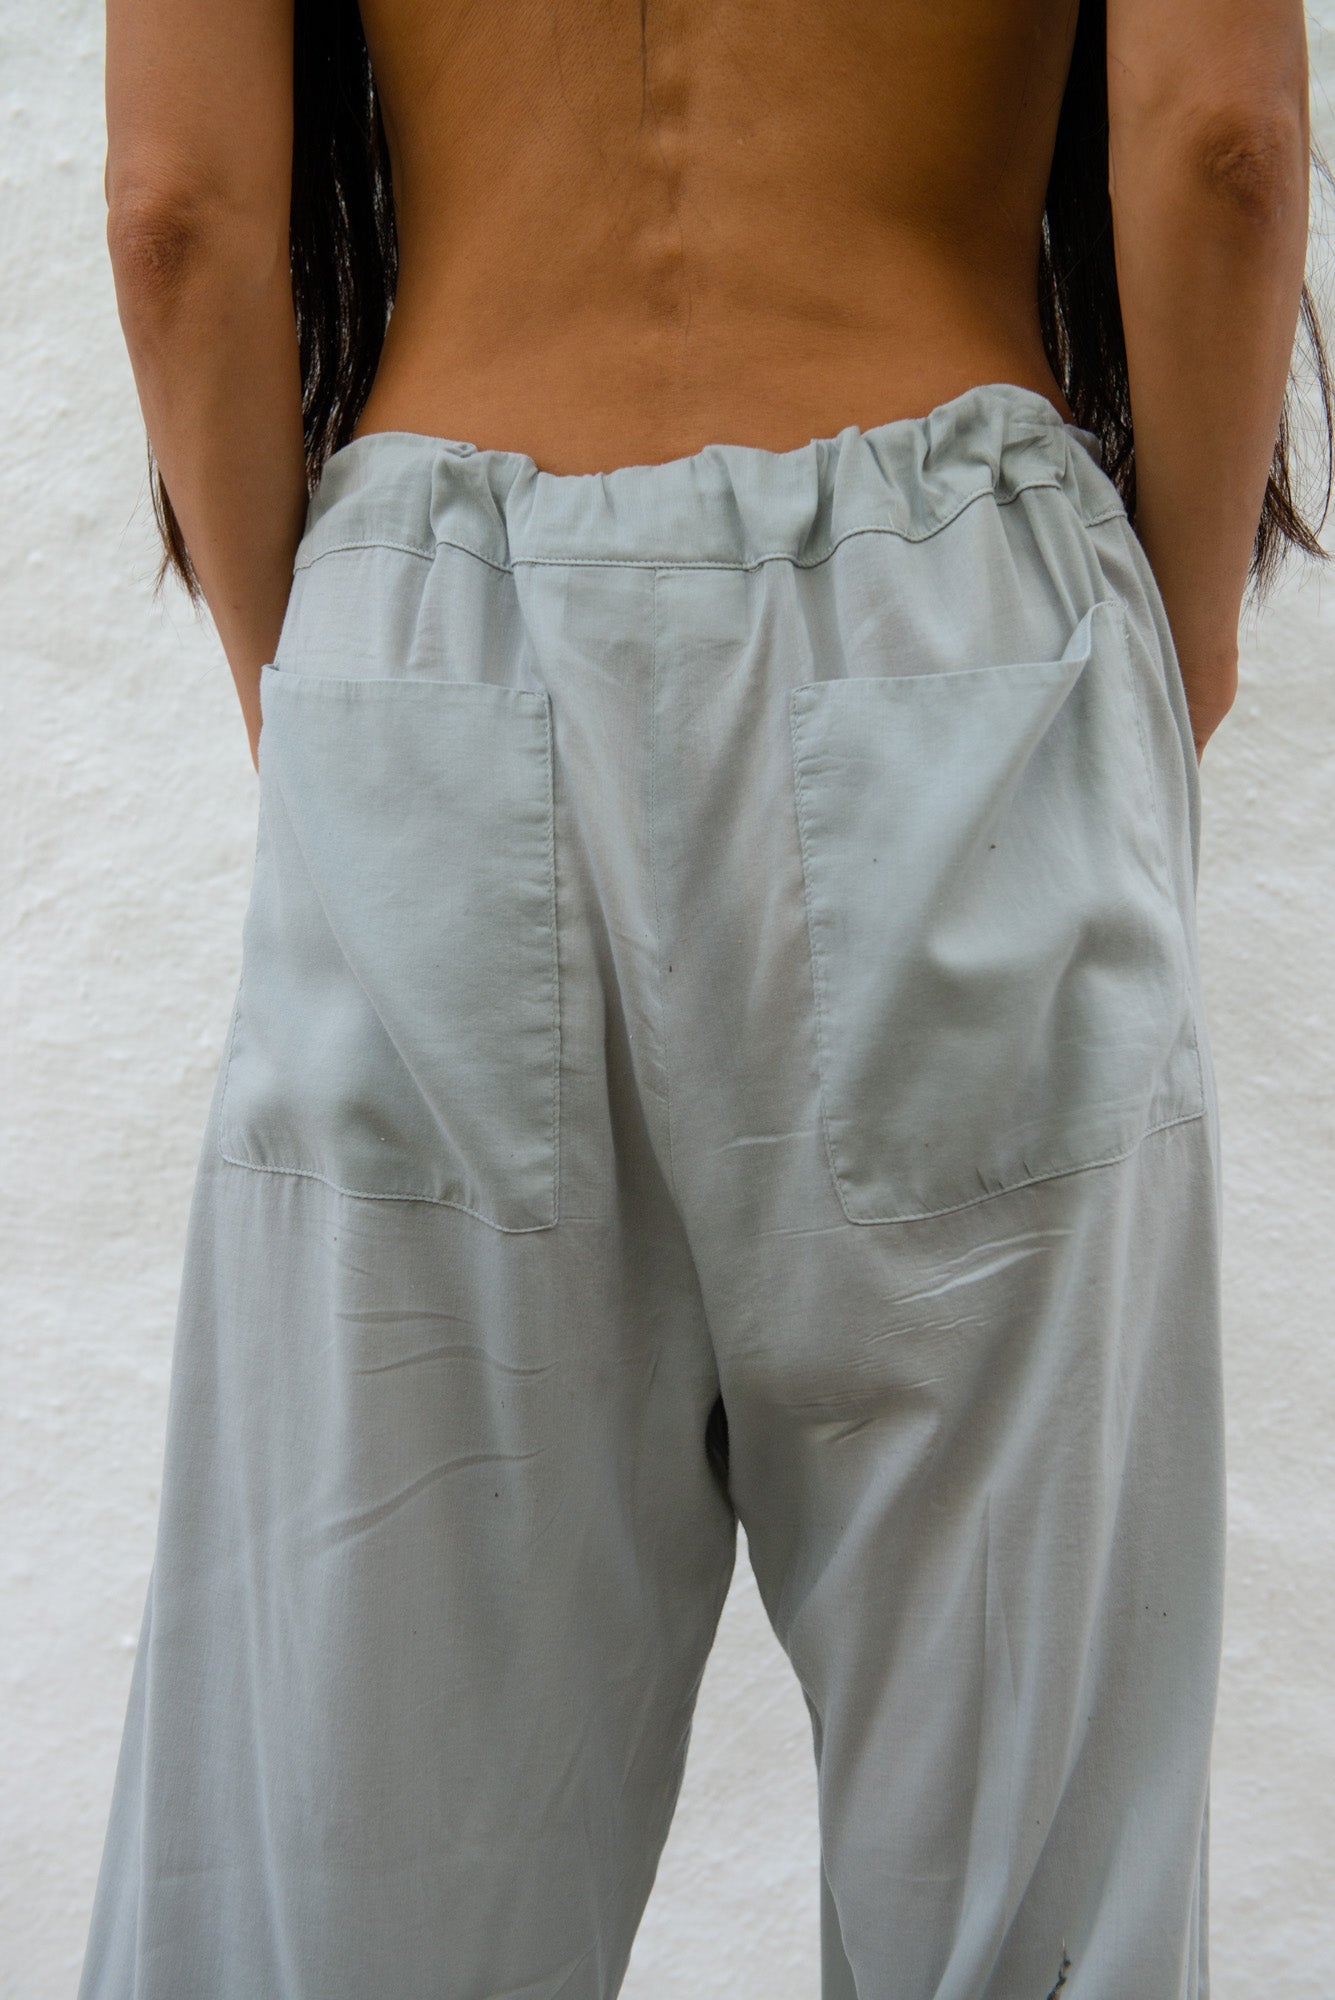 Can Pep Rey wide pants Andrea sun - wrought iron